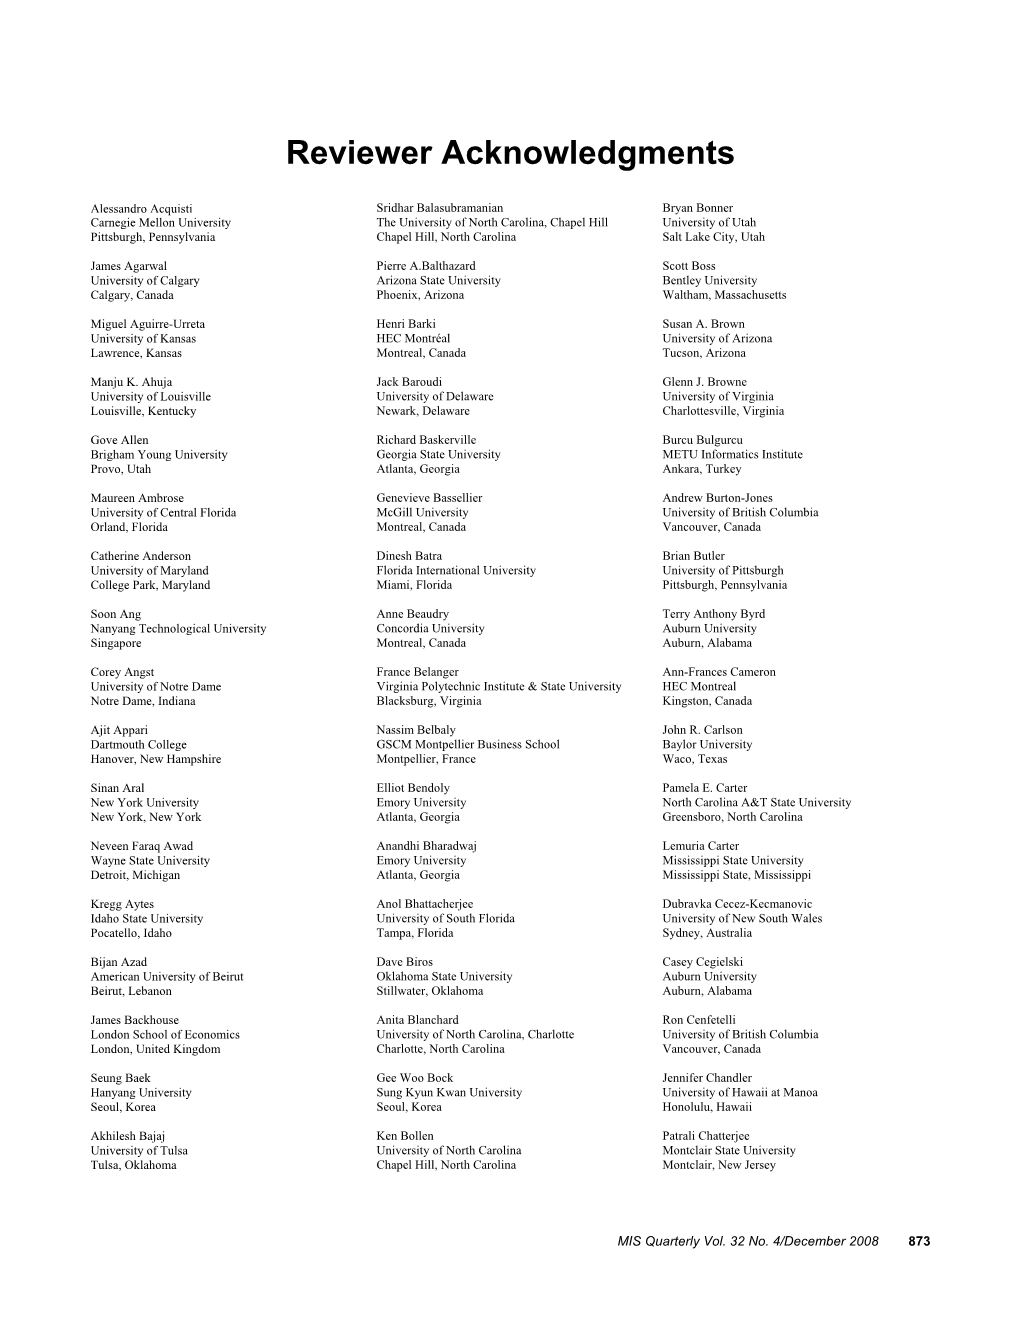 Reviewer Acknowledgments, 2008